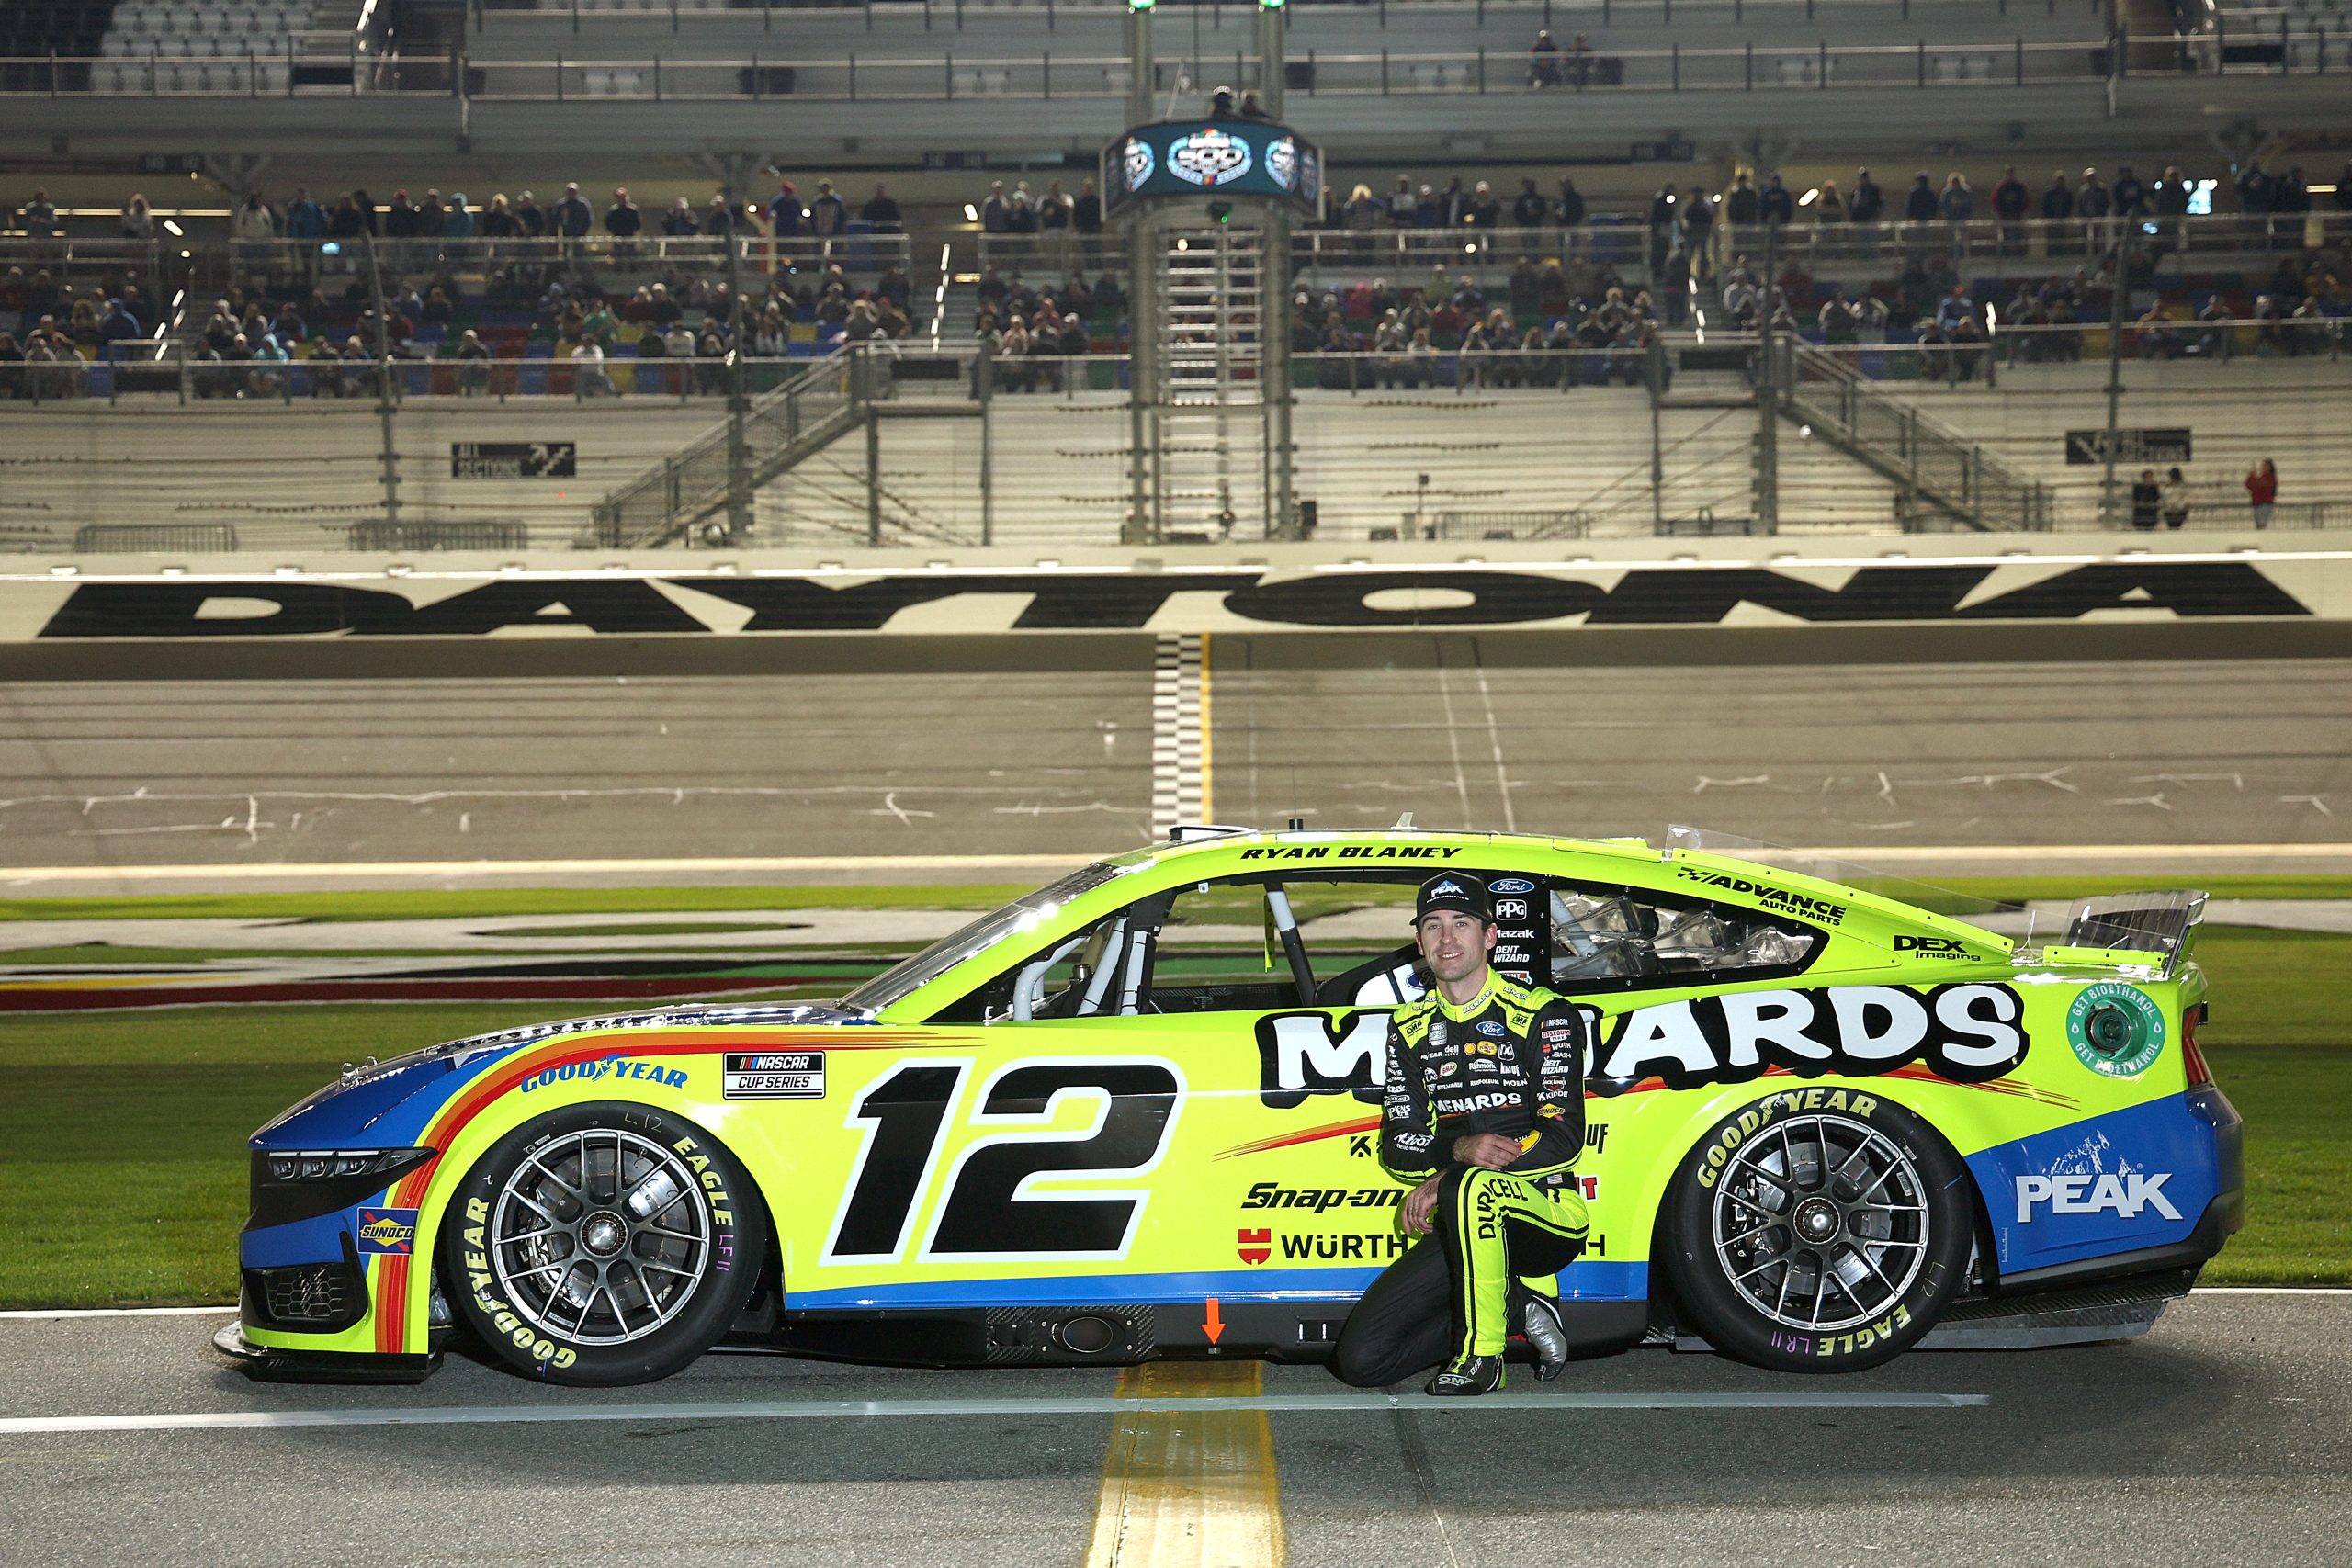 Ryan Blaney, driver of the #12 Menards/PEAK Ford, poses for a photo on the grid during qualifying for the NASCAR Cup Series Daytona 500 at Daytona International Speedway on February 14, 2024 in Daytona Beach, Florida.